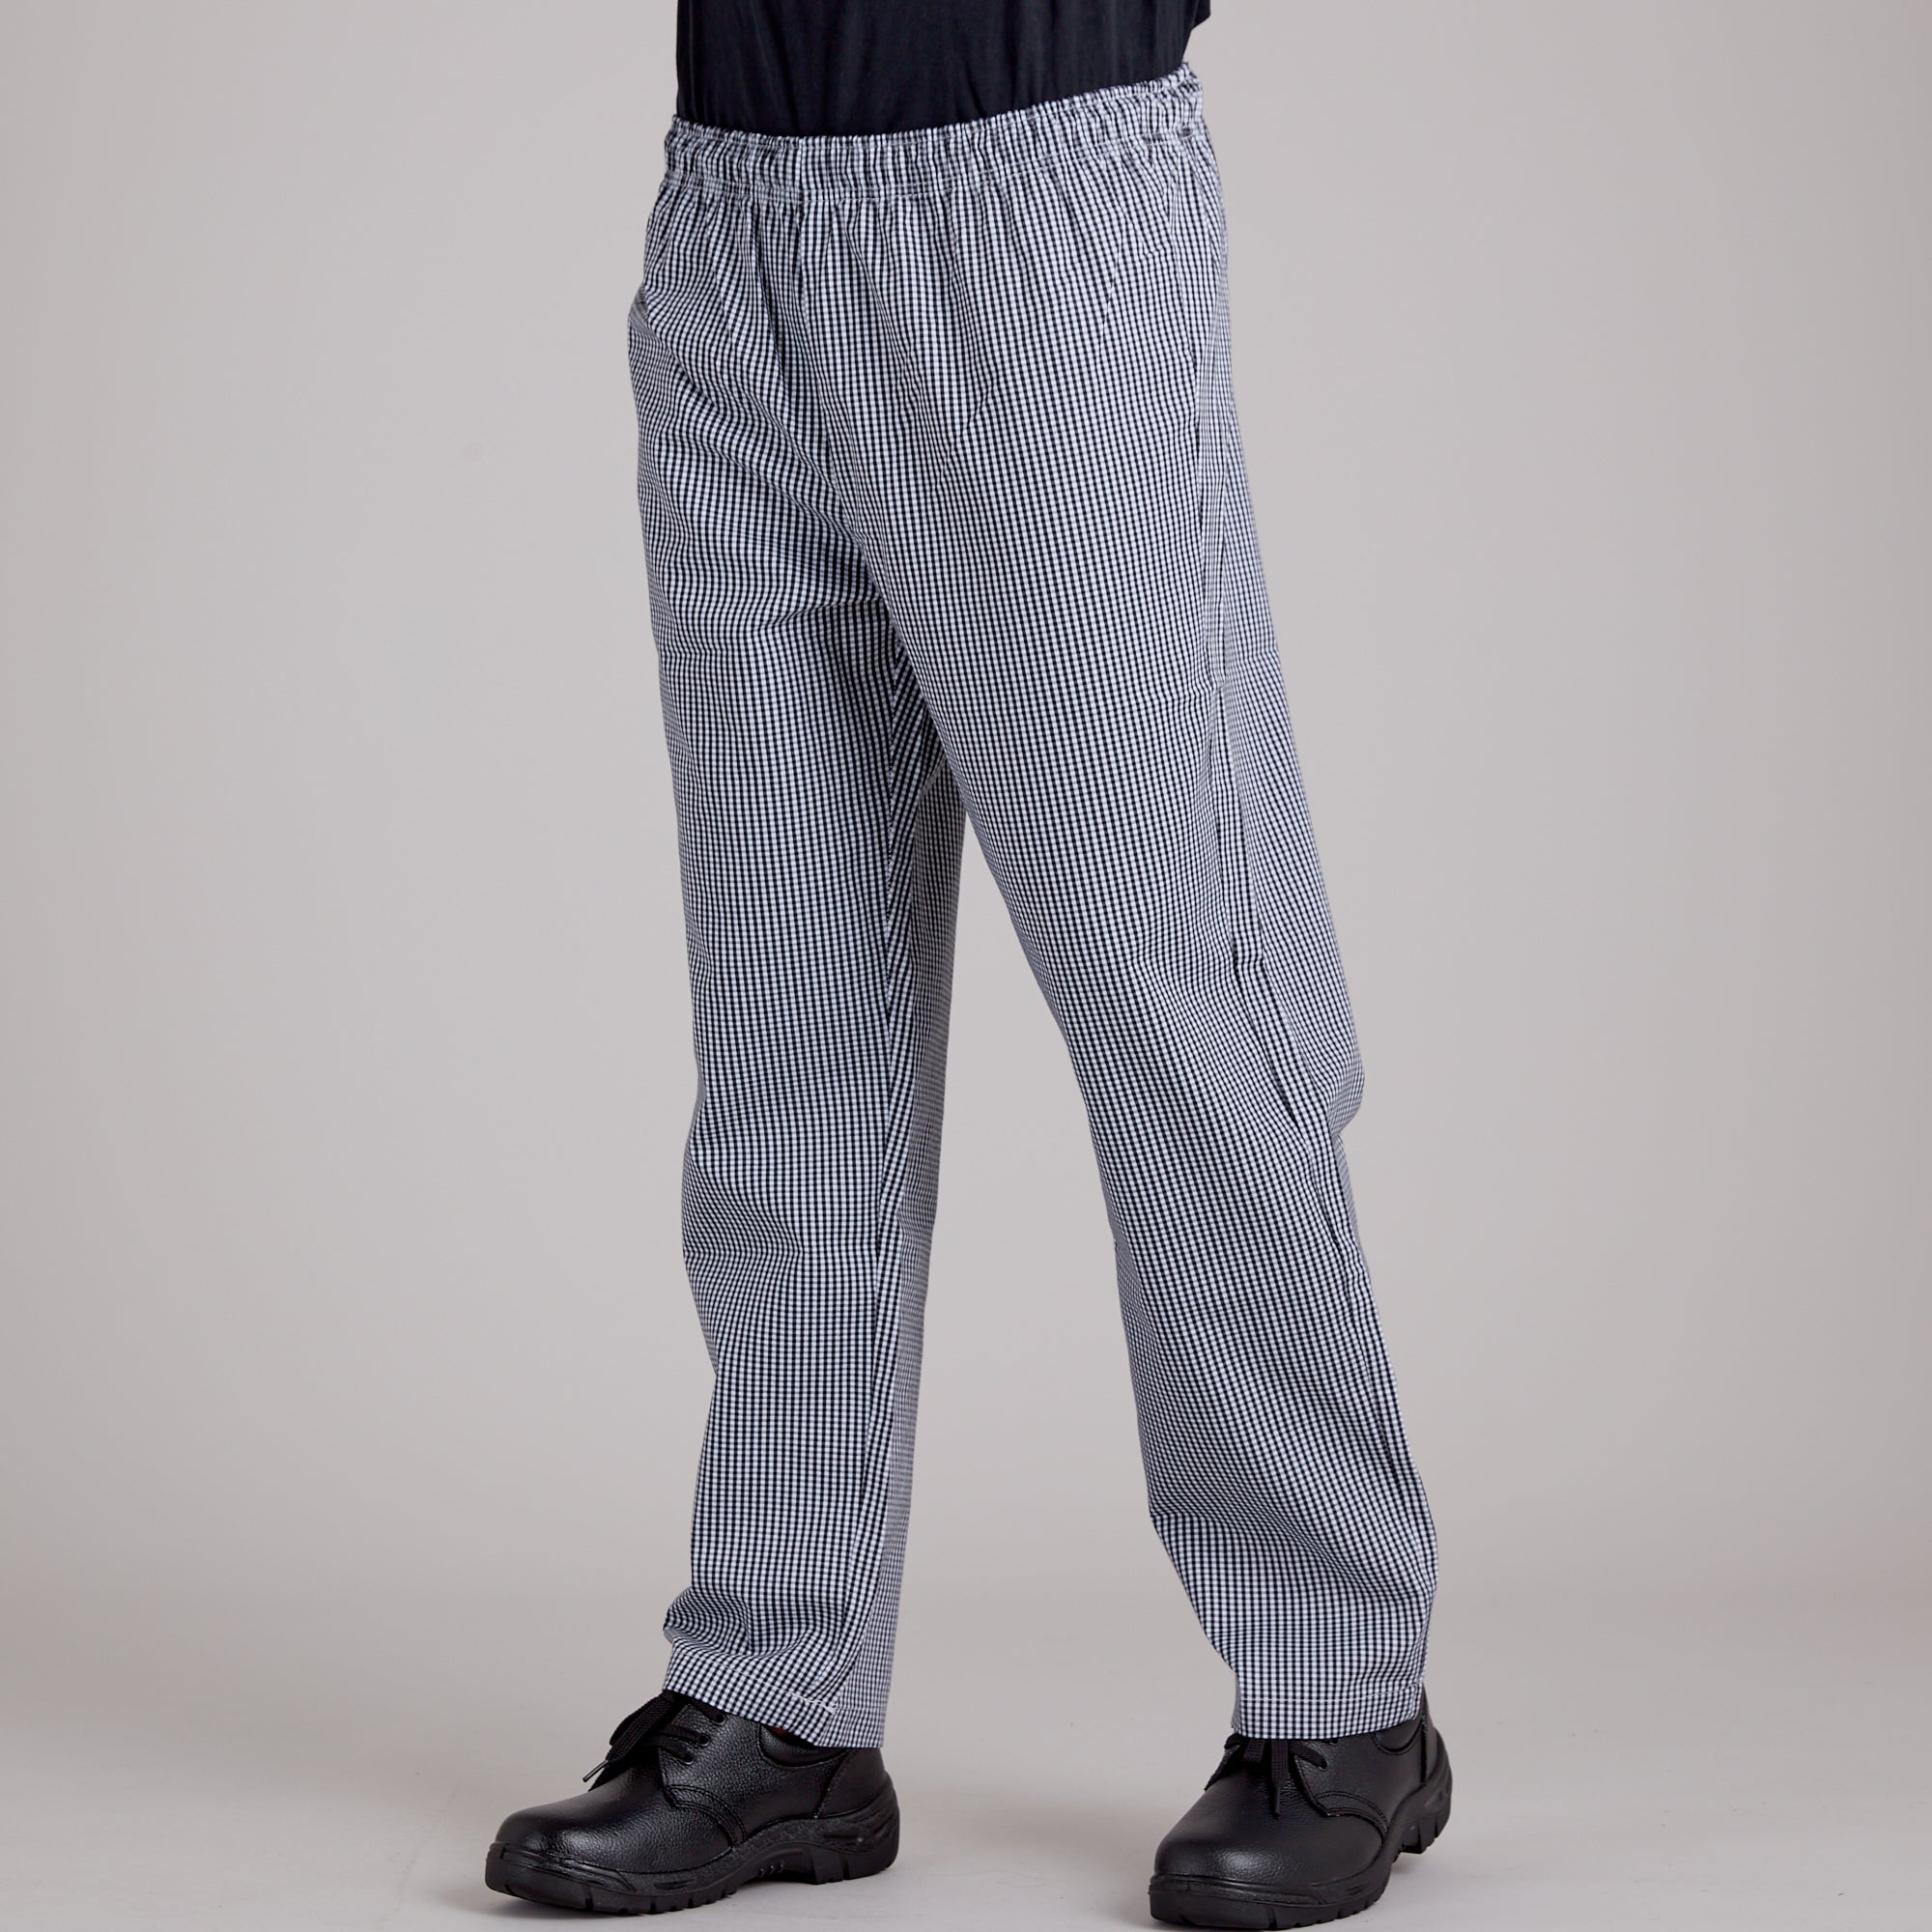 Rent Classic Fit Chef Pants and Restaurant Uniforms | UniFirst